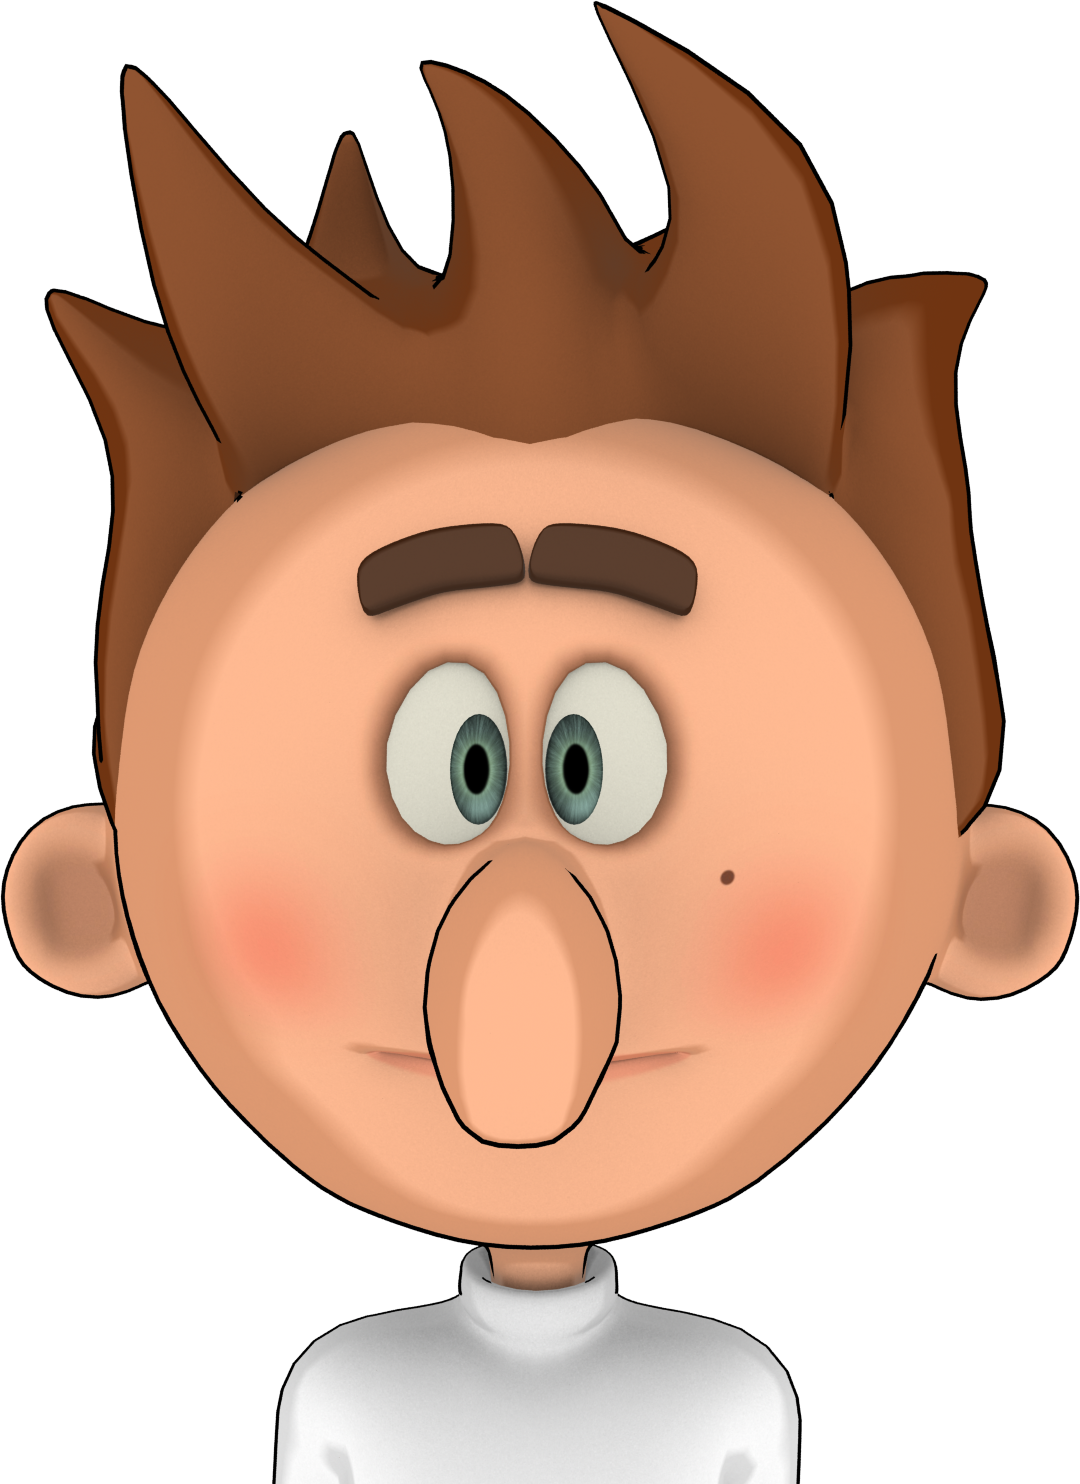 ... Funny face clipart ... - Funny Face Clipart